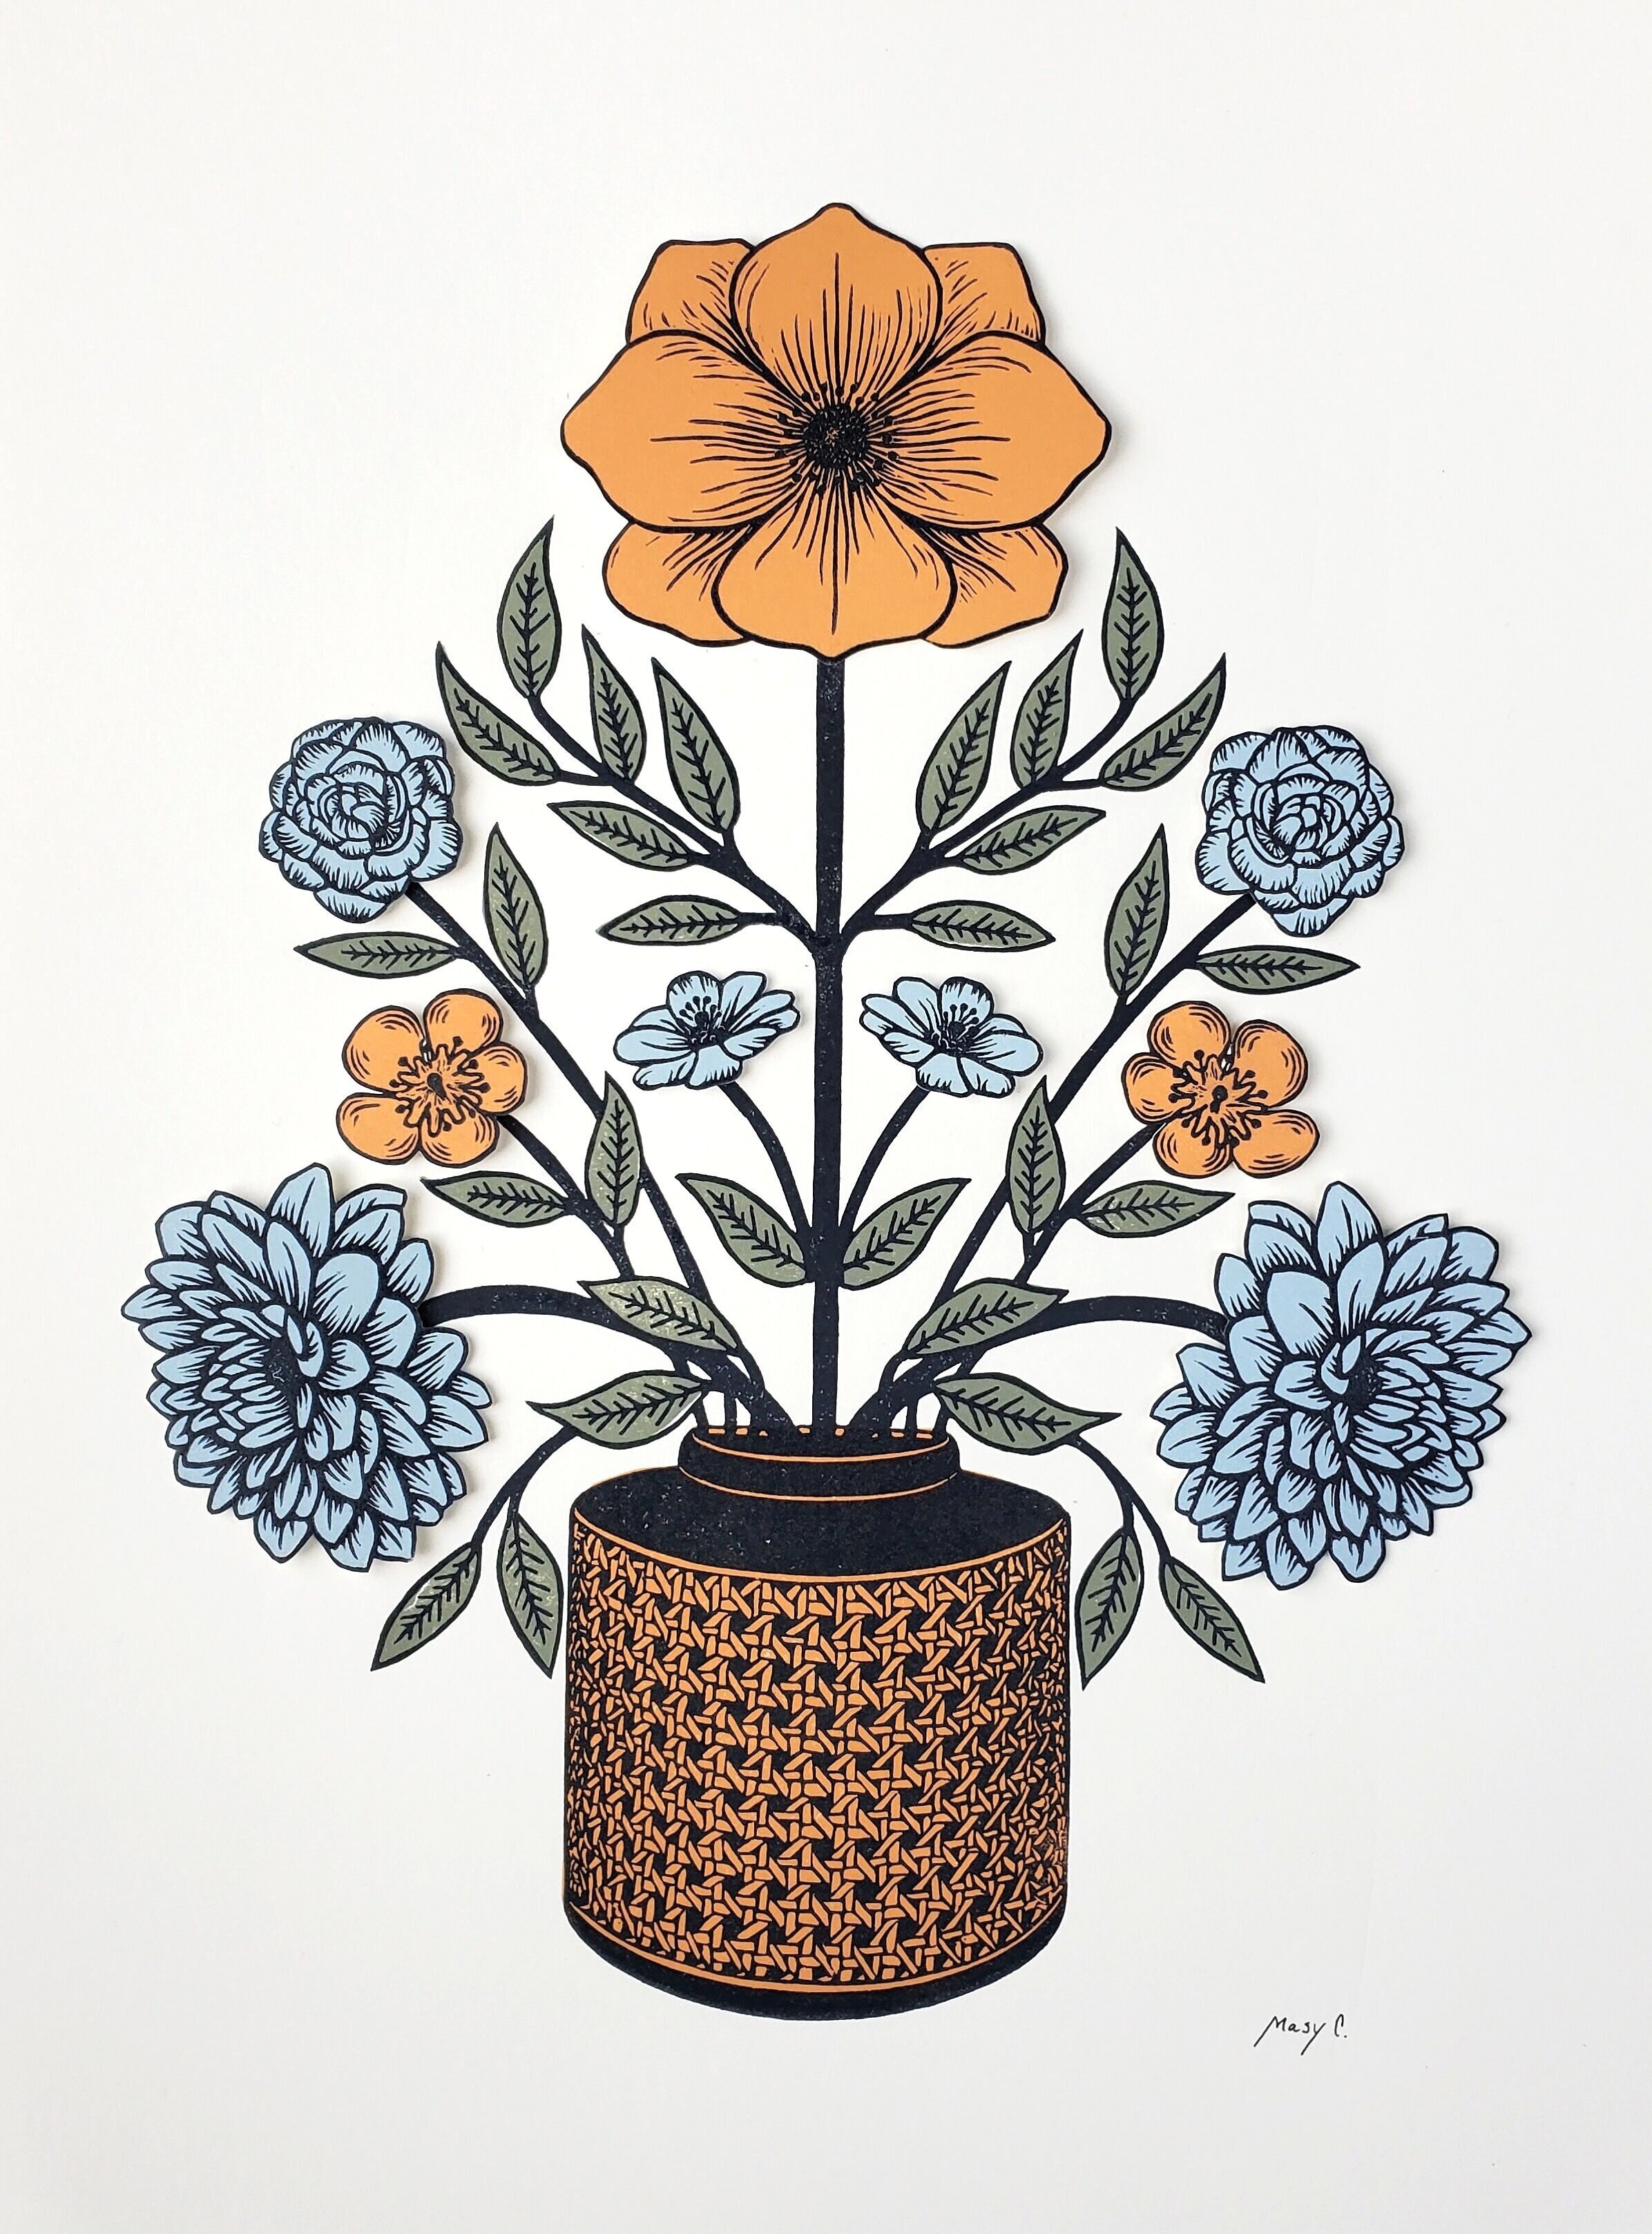 Flowers in cane vase block print collage - ©Press Relief Prints